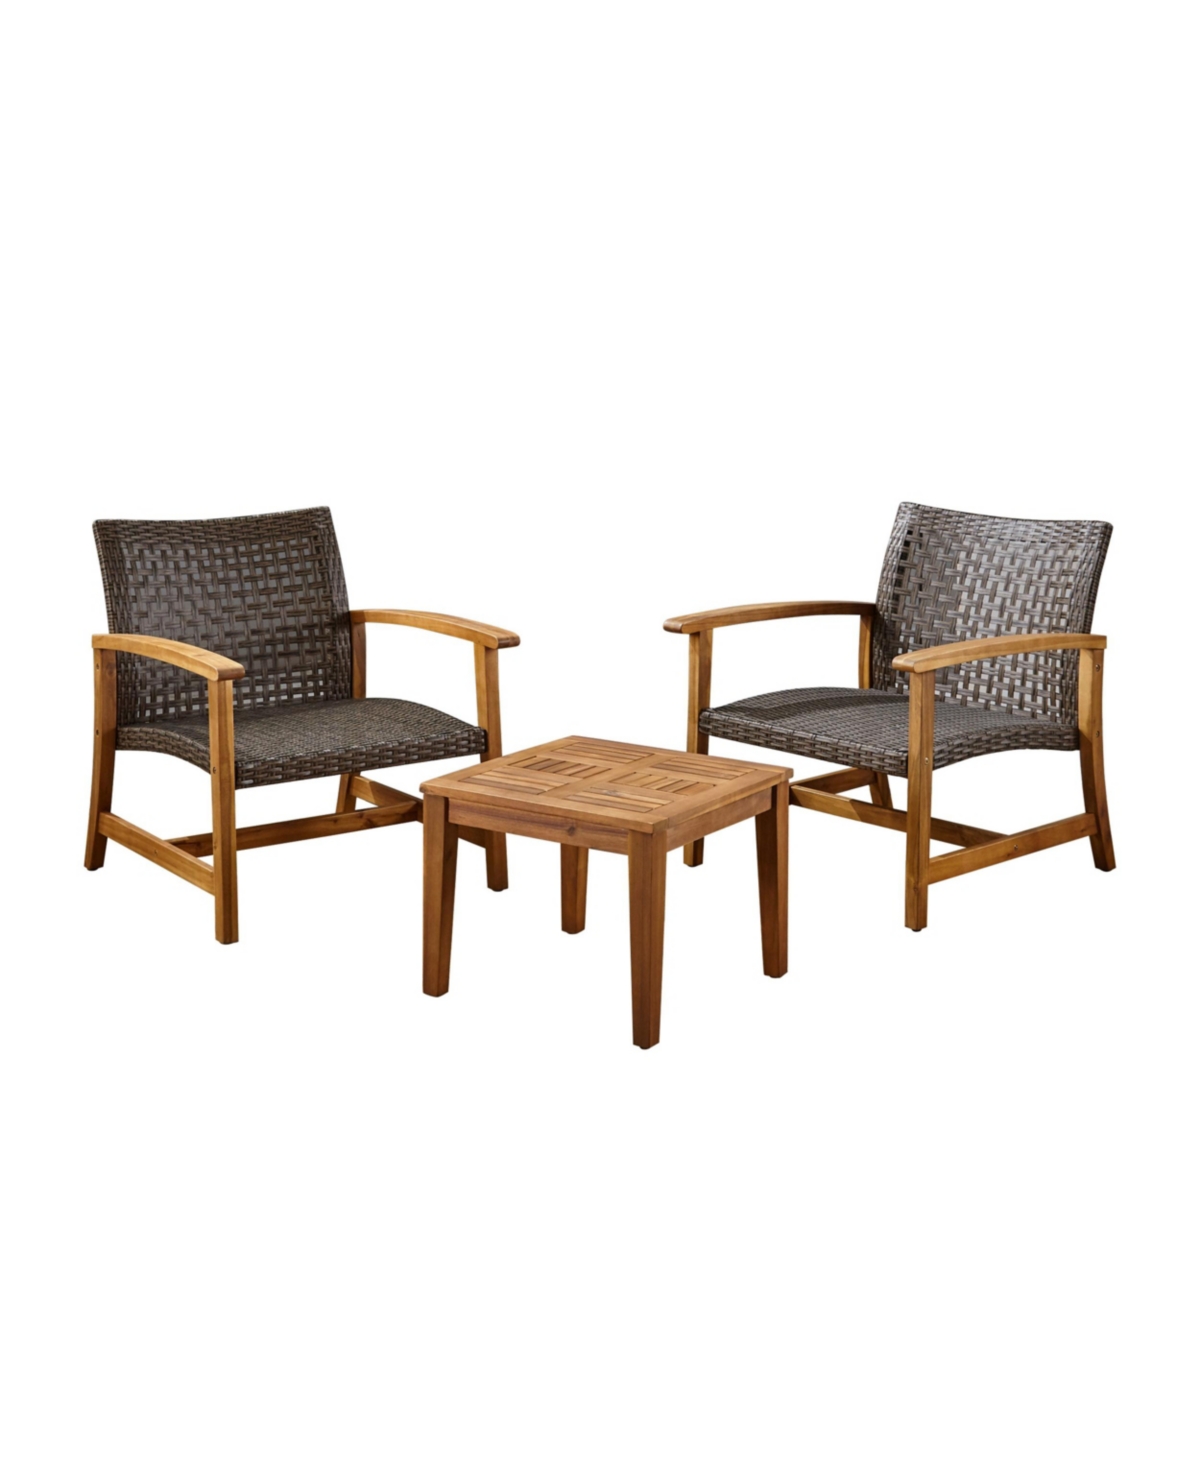 Noble House Hampton Outdoor Wicker Club Chairs And Side Table Set, 3 Piece In Mixed Mocha